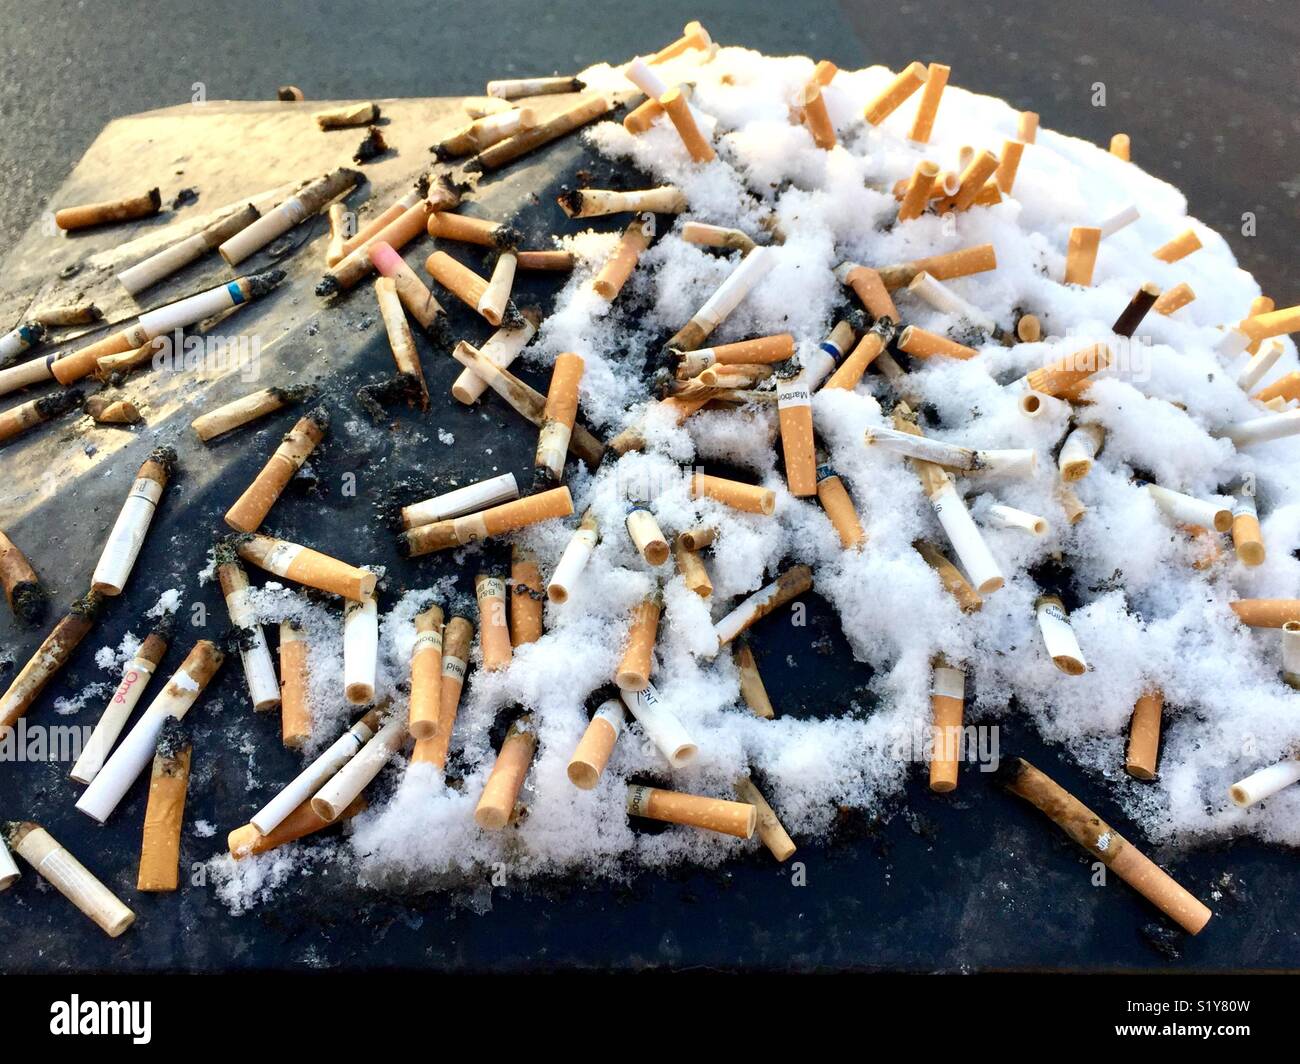 Cigarette ends stubbed out on top of snow covered street bin in London in the winter Stock Photo